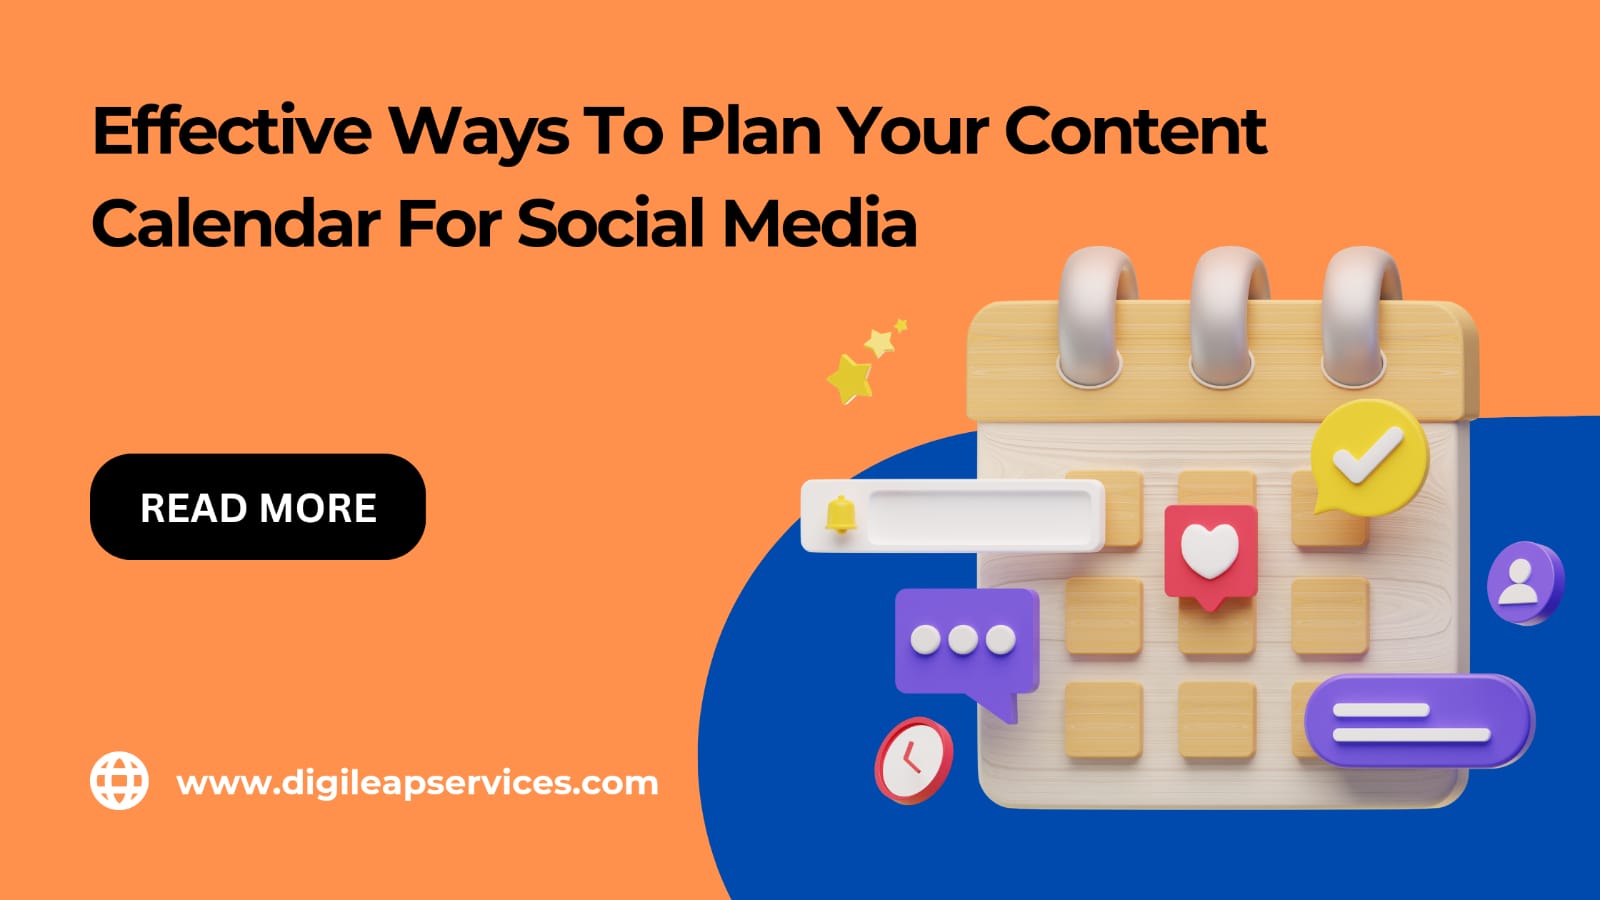 Effective Ways To Plan Your Content Calendar For Social Media